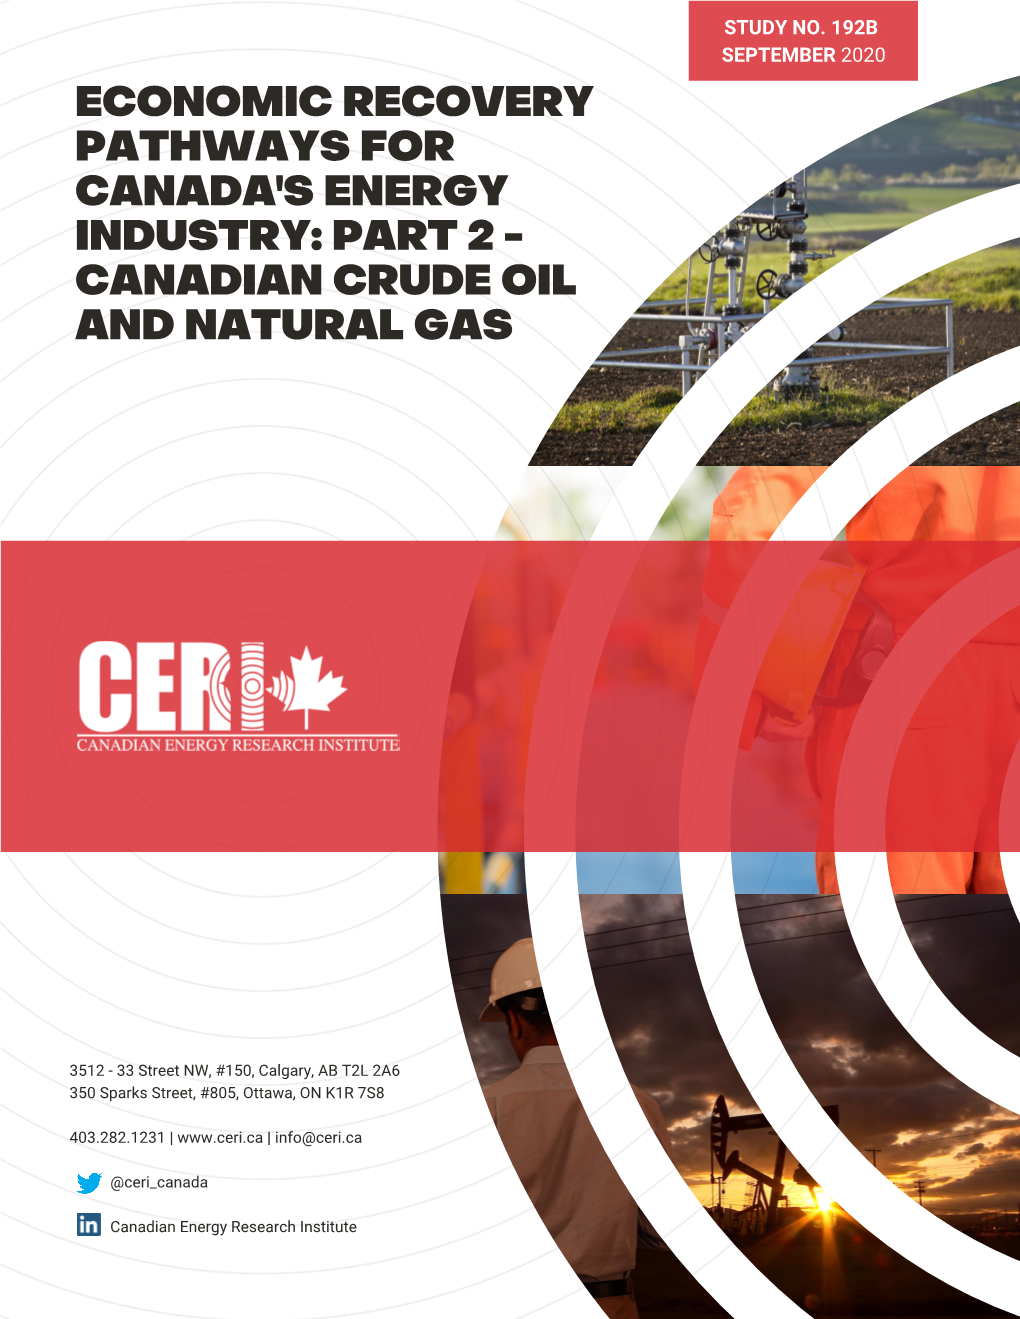 Economic Recovery Pathways for Canada's Energy Industry: Part 2 - Canadian Crude Oil and Natural Gas